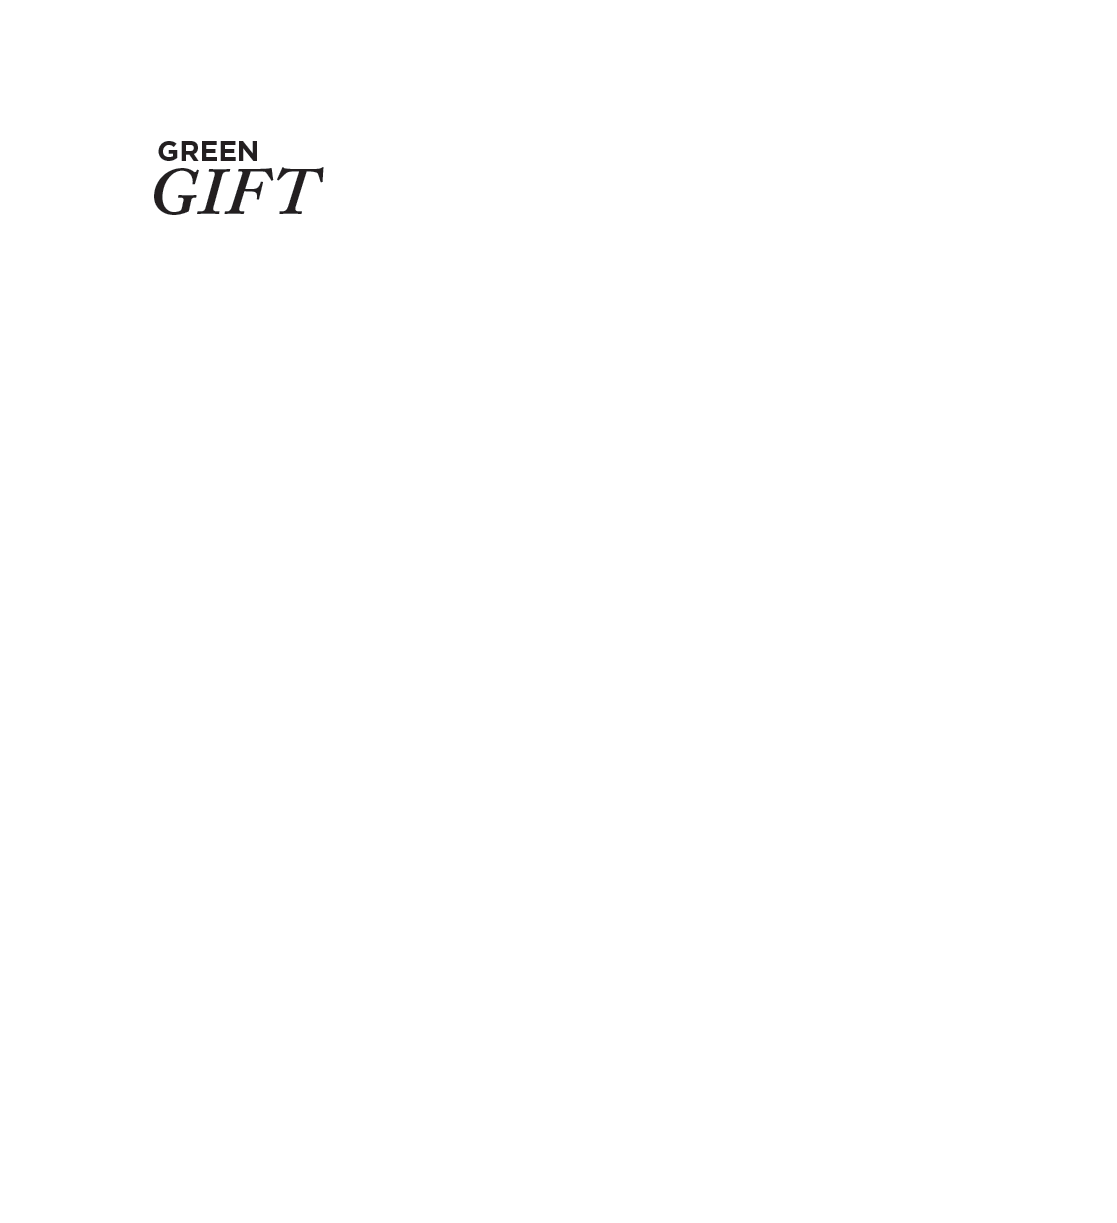 Green Gift: A New Vision for Student Health & Wellness